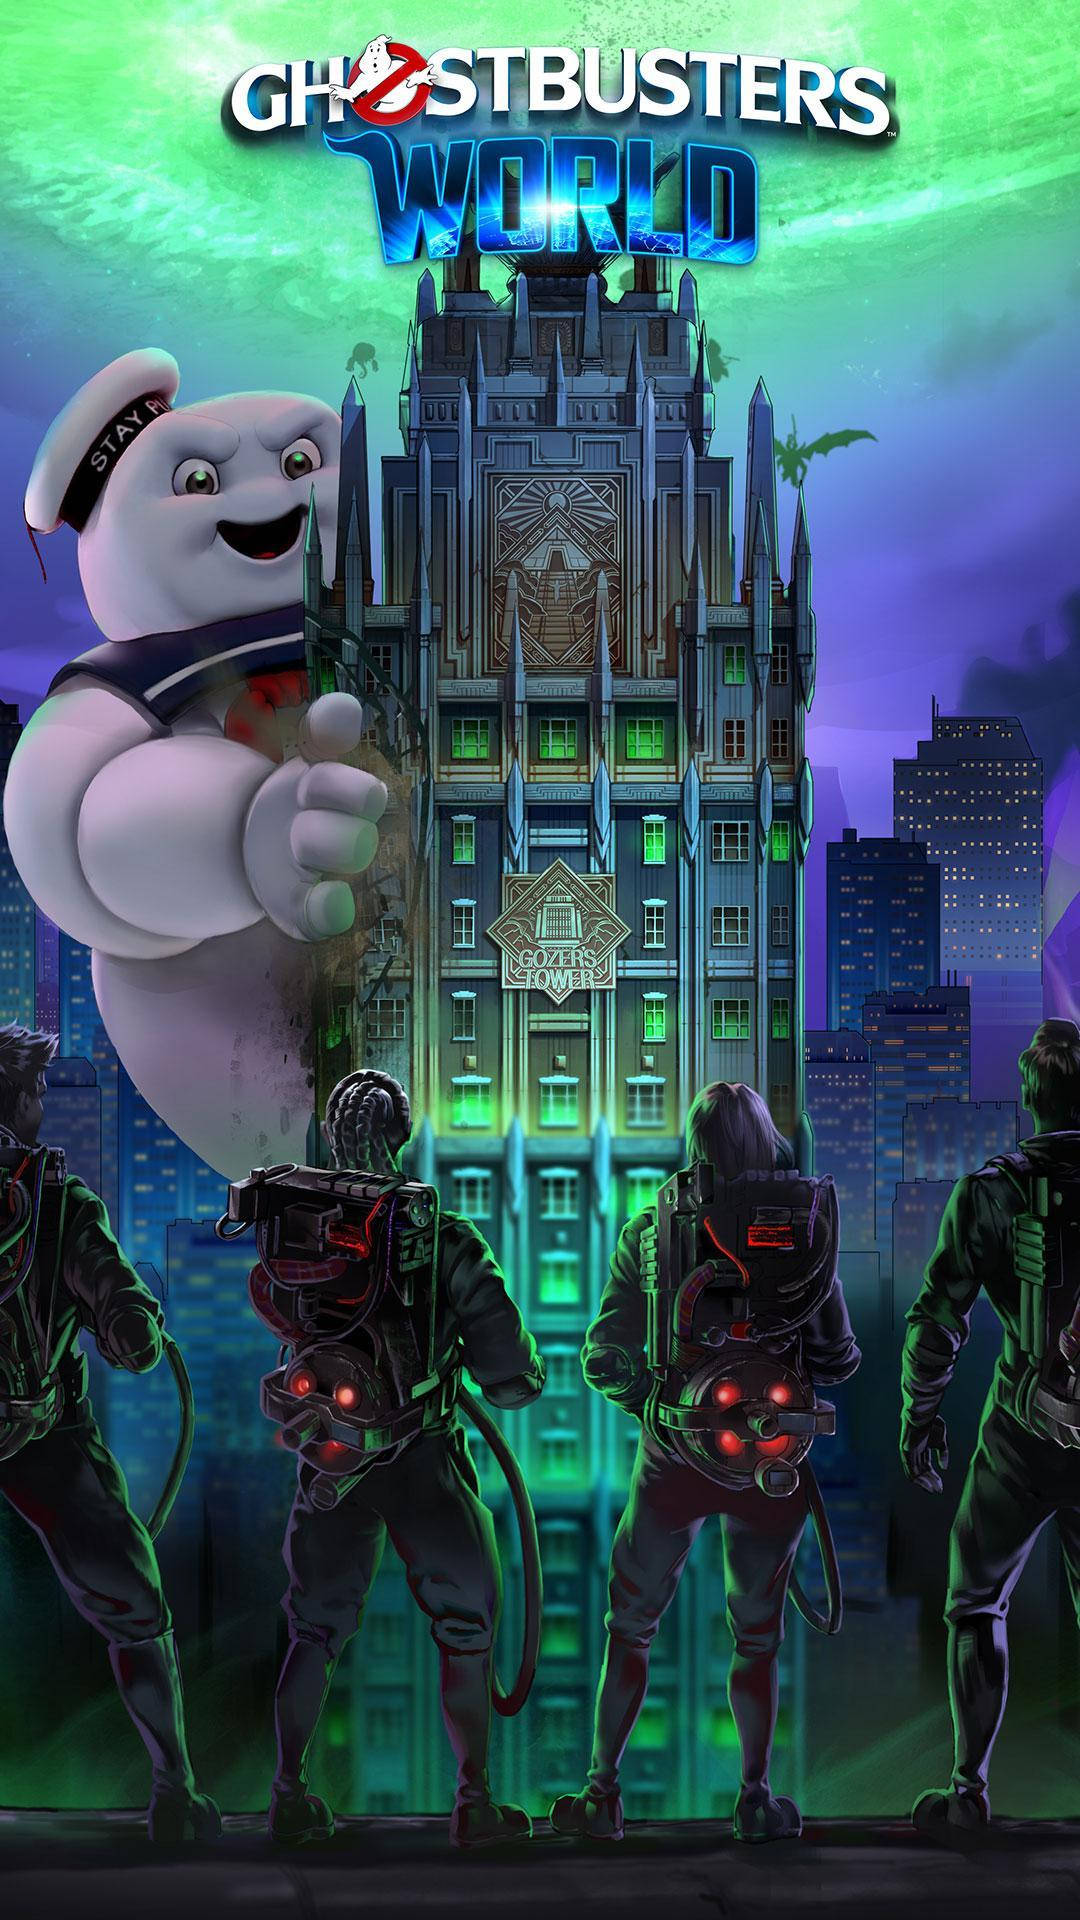 Ghostbusters World Background